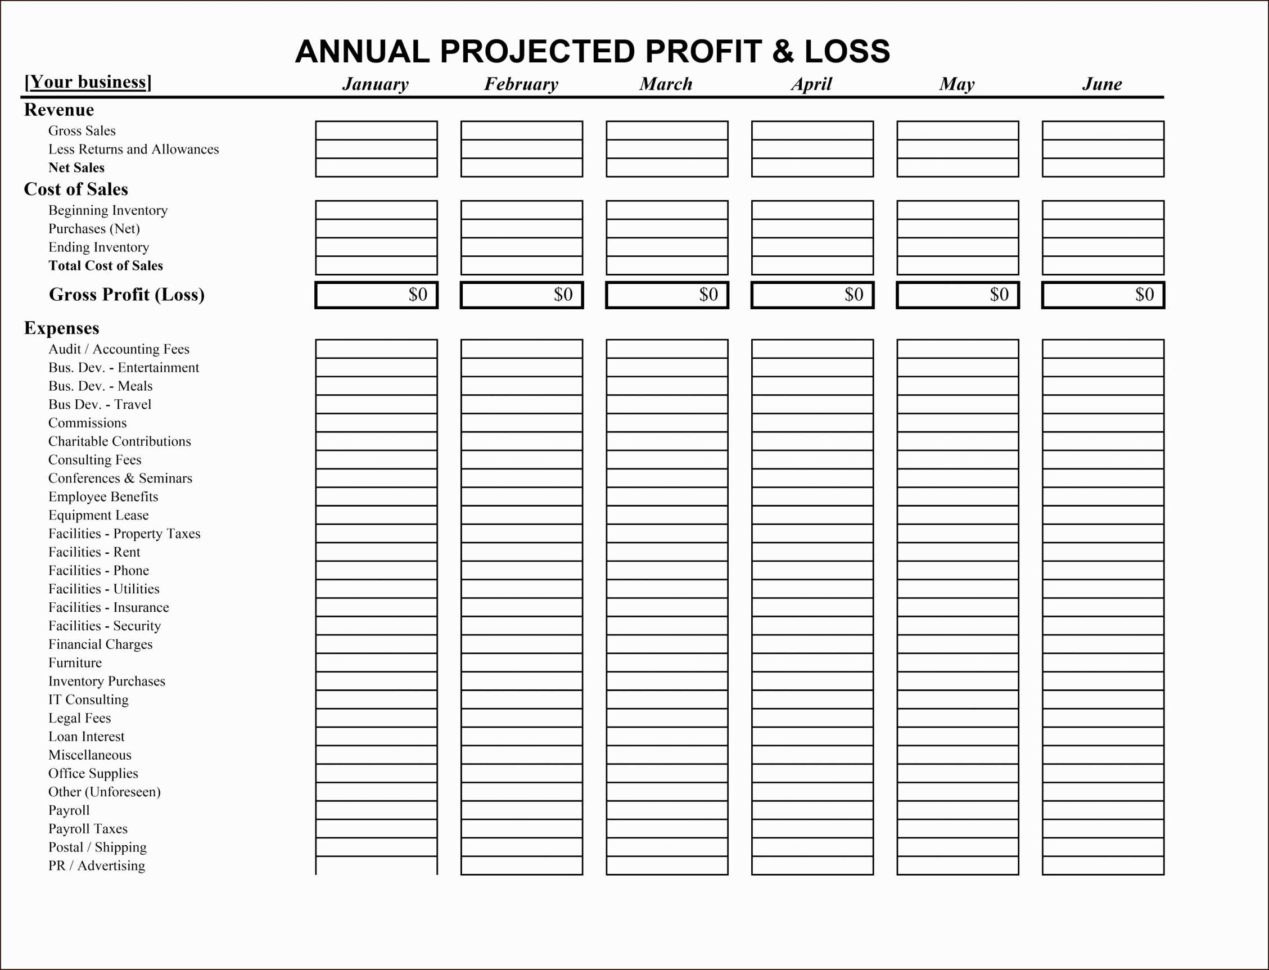 Profit Loss Statement For Self Employed Small Business Profit And To in Profit And Loss Statement For Small Business Template